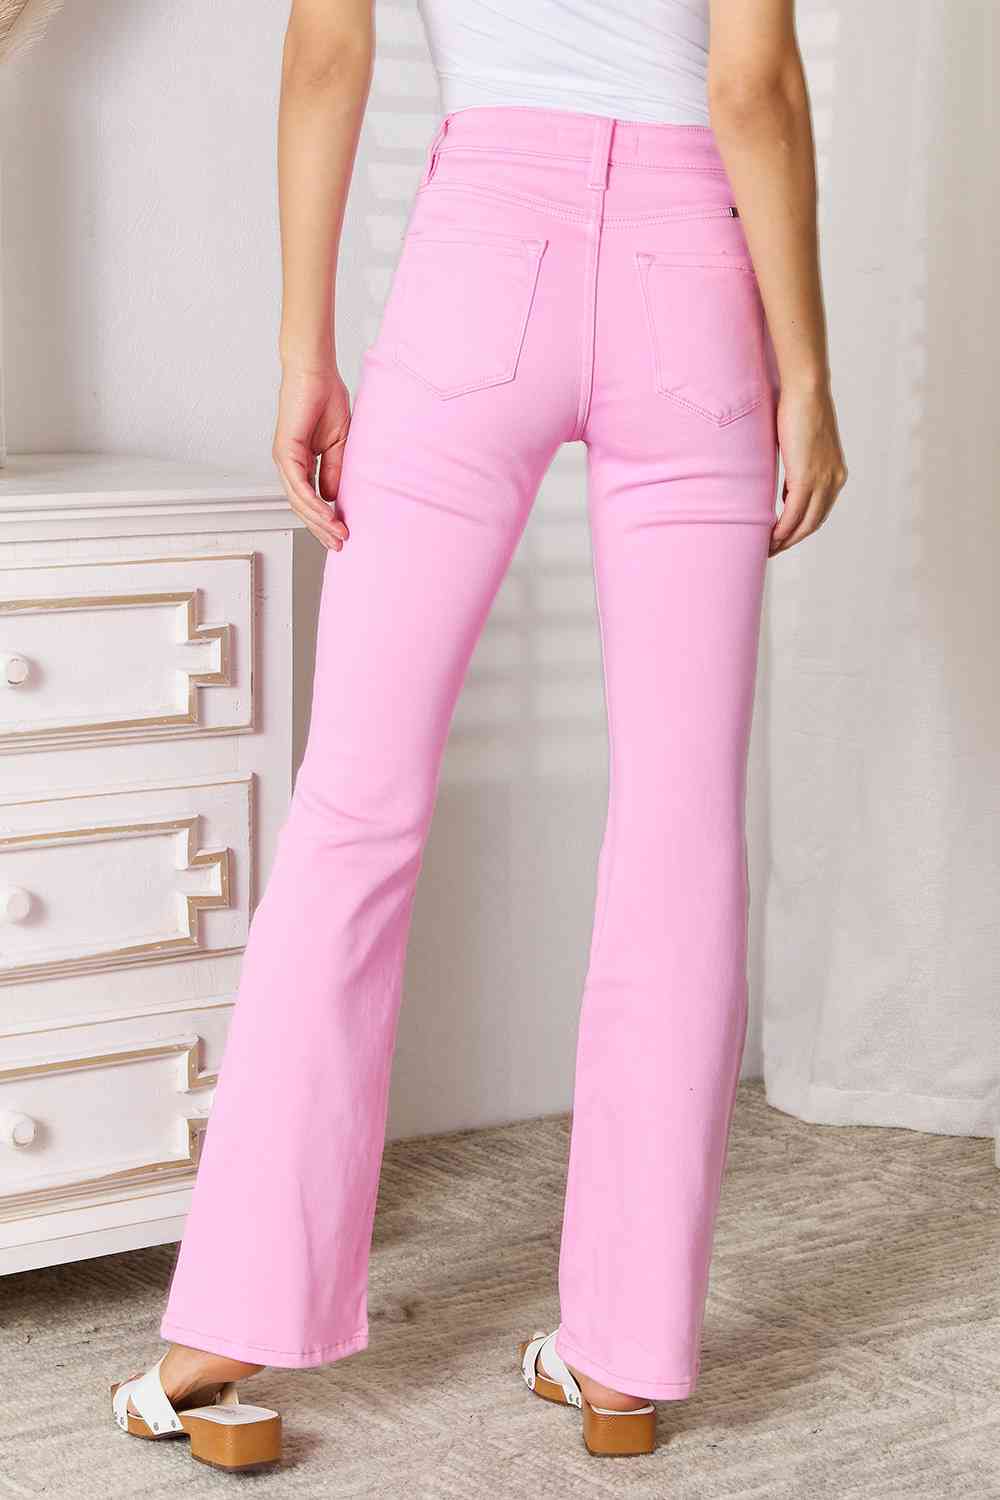 Back View of Model wearing Chic Kancan High Rise Carnation Pink Bootcut Jeans